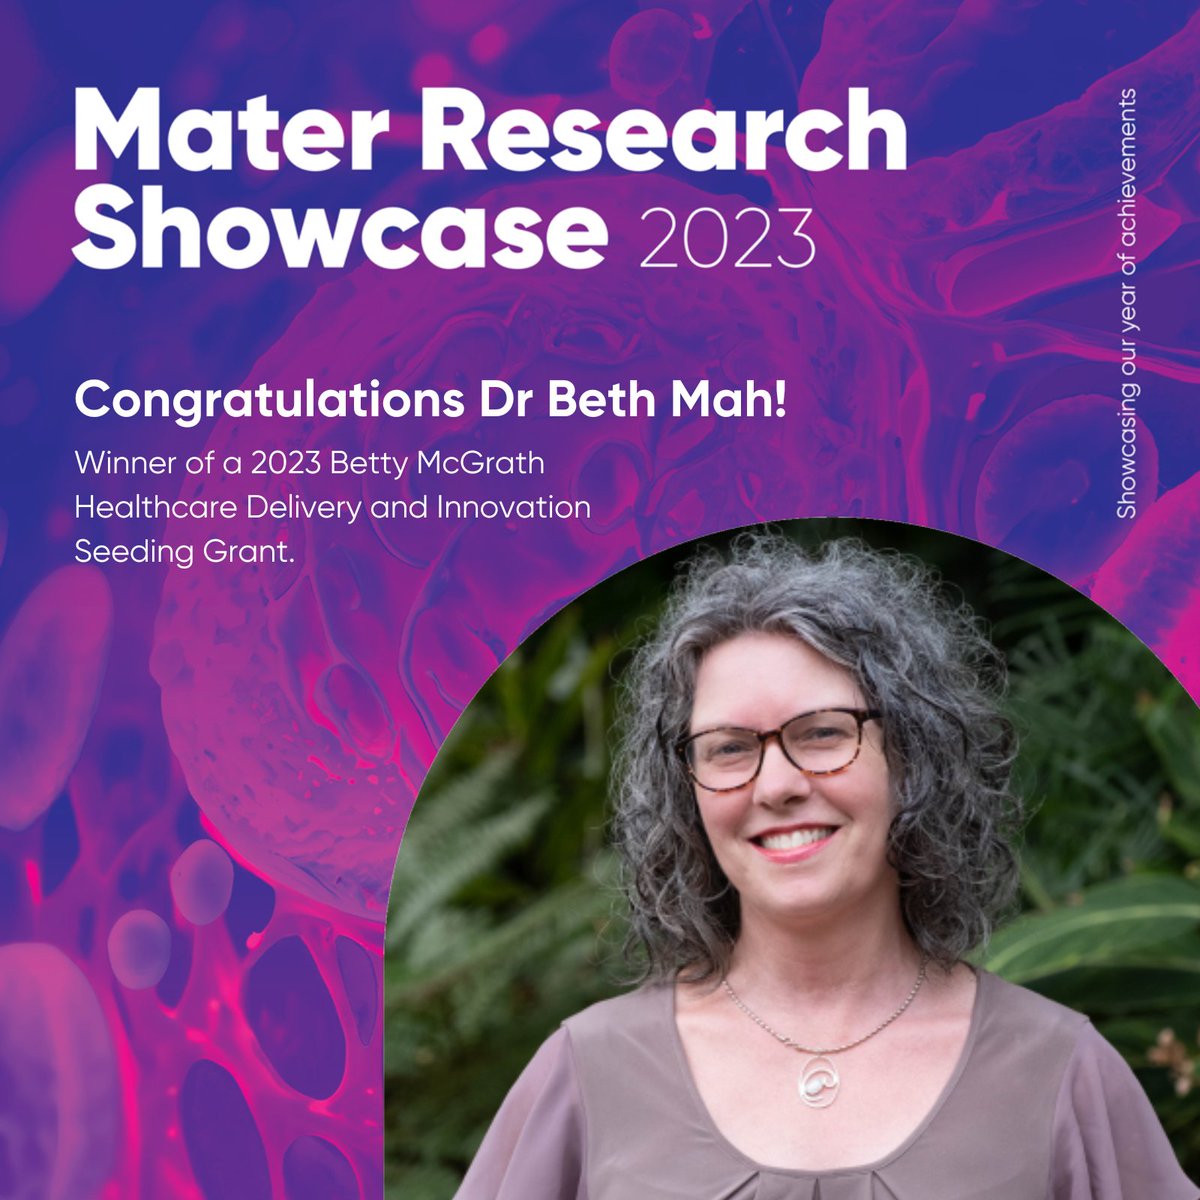 Congratulations to Dr Beth Mah, winner of a 2023 Betty McGrath Healthcare Delivery and Innovation Seeding Grant. Dr Mah is the Medical Director at Catherine’s House.